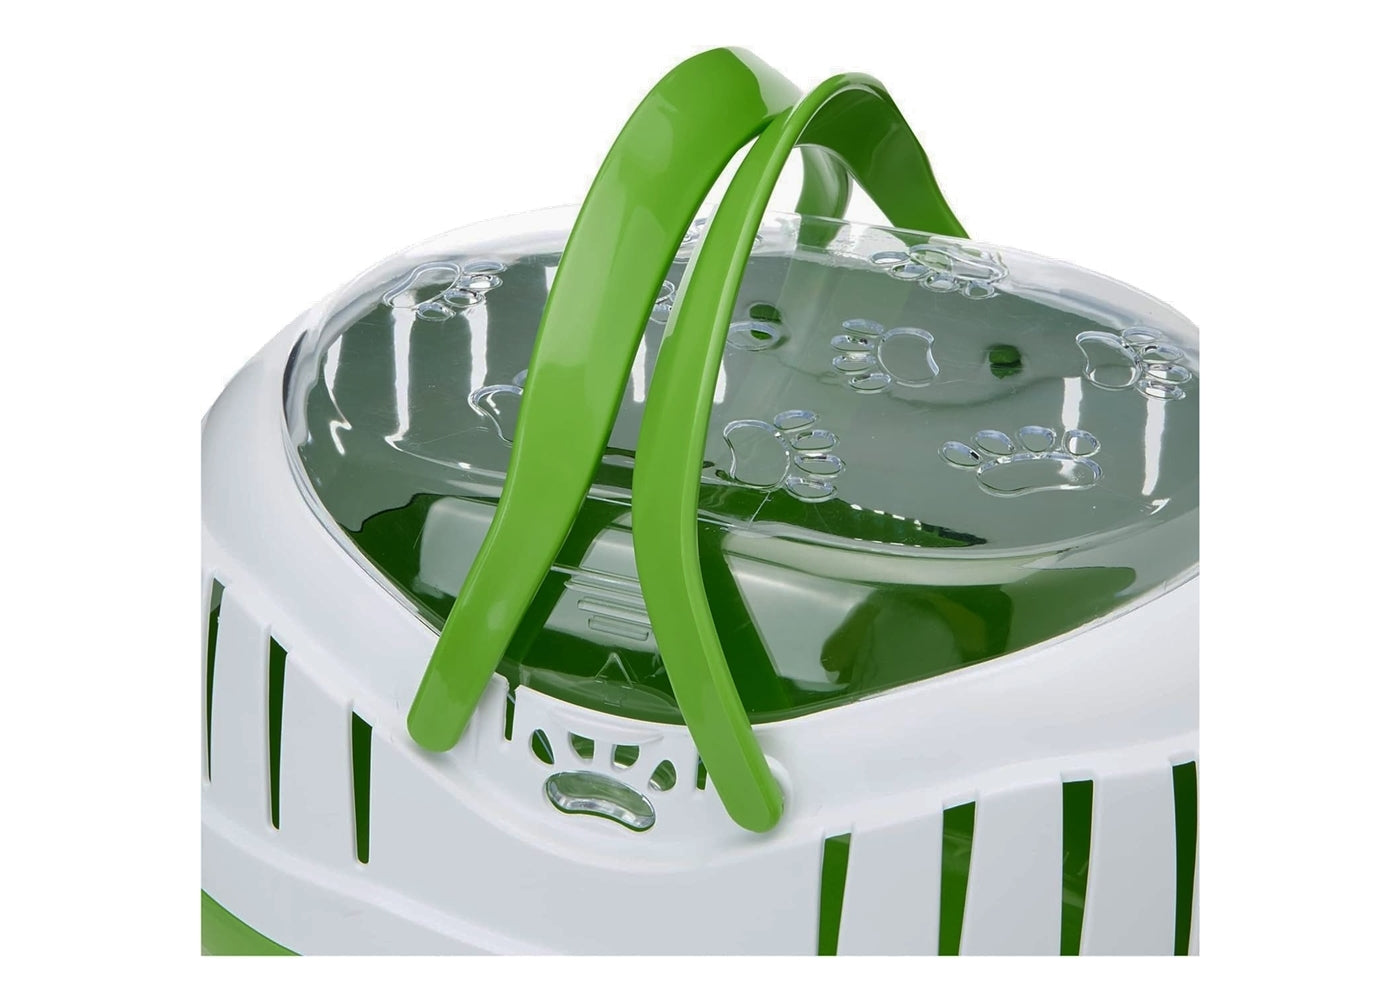 Happy Pet - Small Animal Carrier (Green) - Buy Online SPR Centre UK